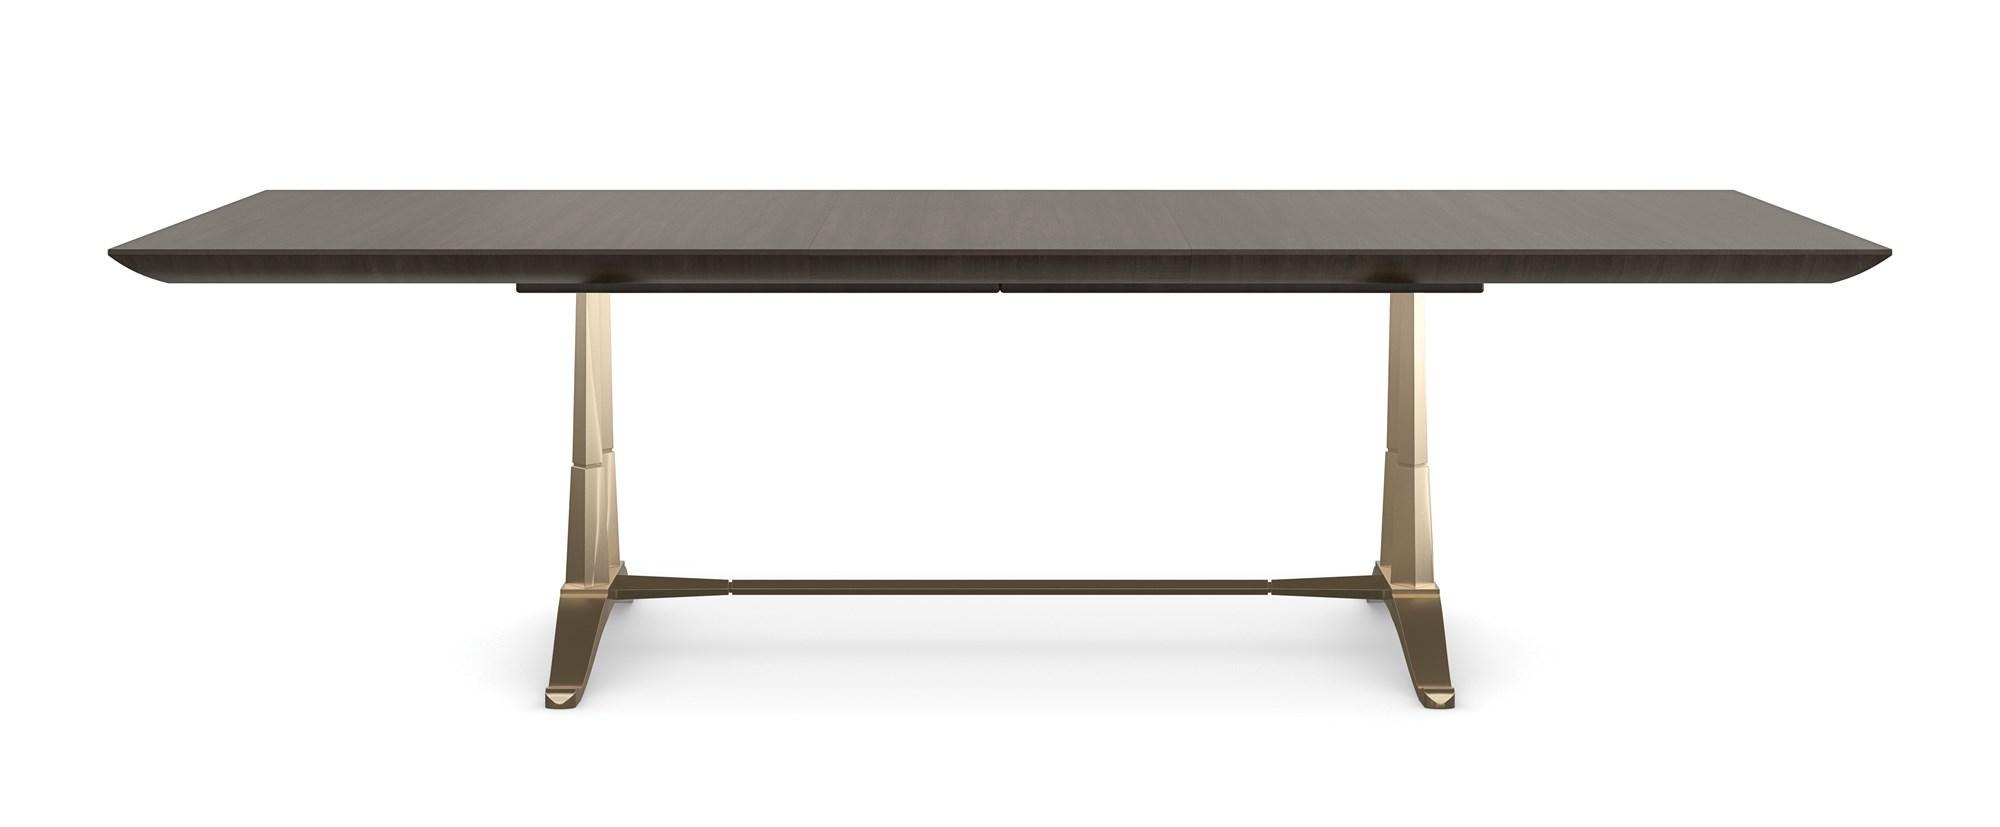 Traditional Dining Table D'ORSAY CLA-022-203 in Dark Chocolate, Champagne 